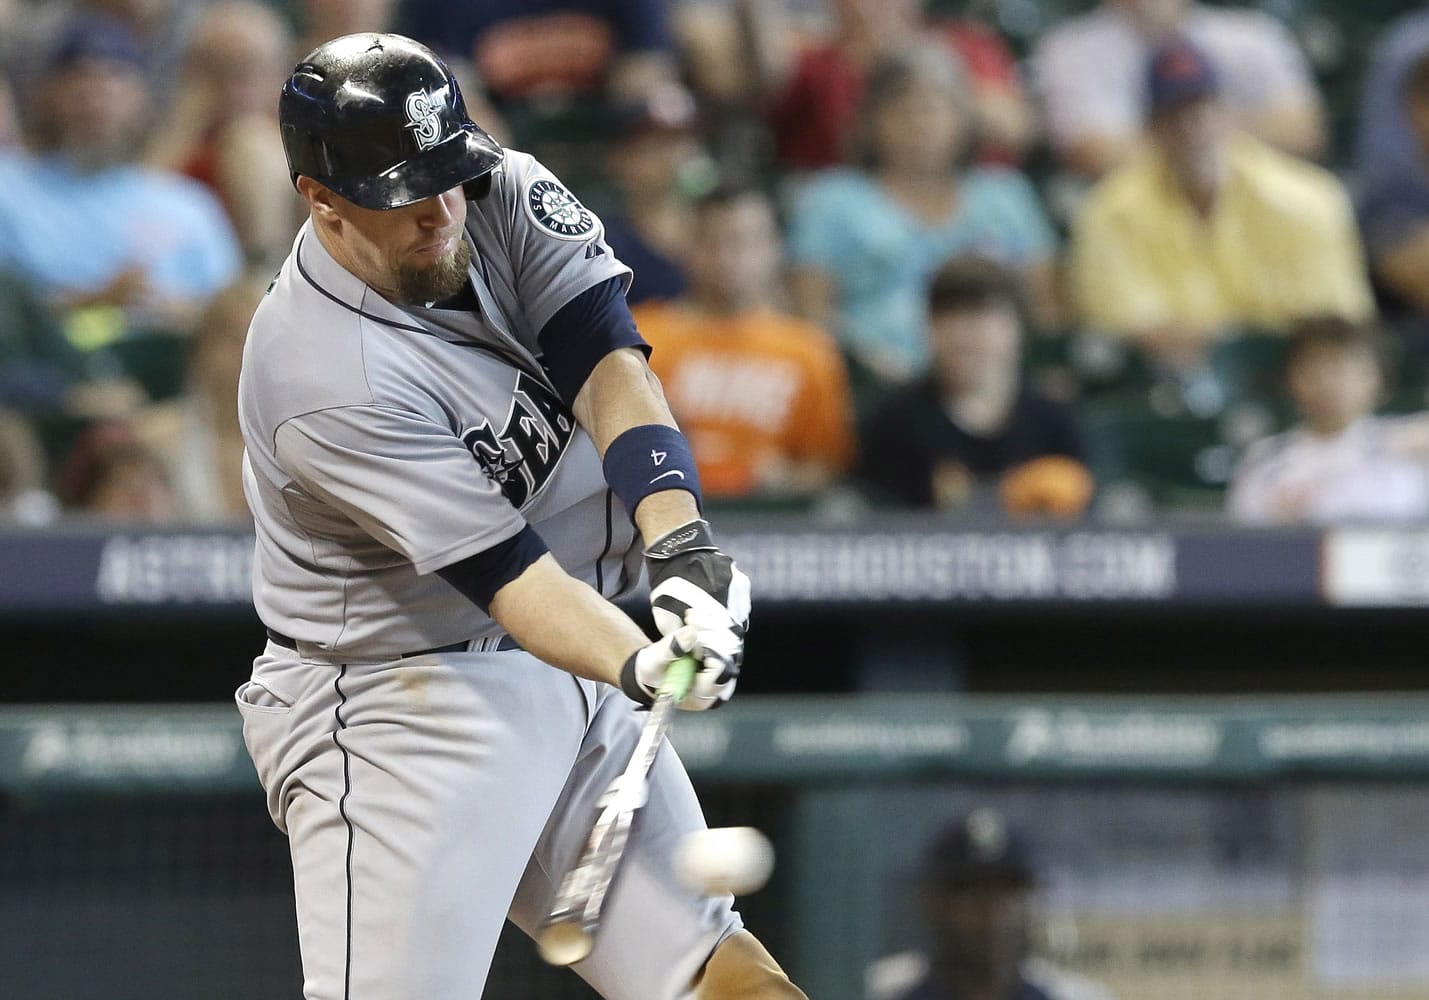 Seattle Mariners' John Buck hits an RBI single against the Houston Astros in the sixth inning Wednesday in Houston.